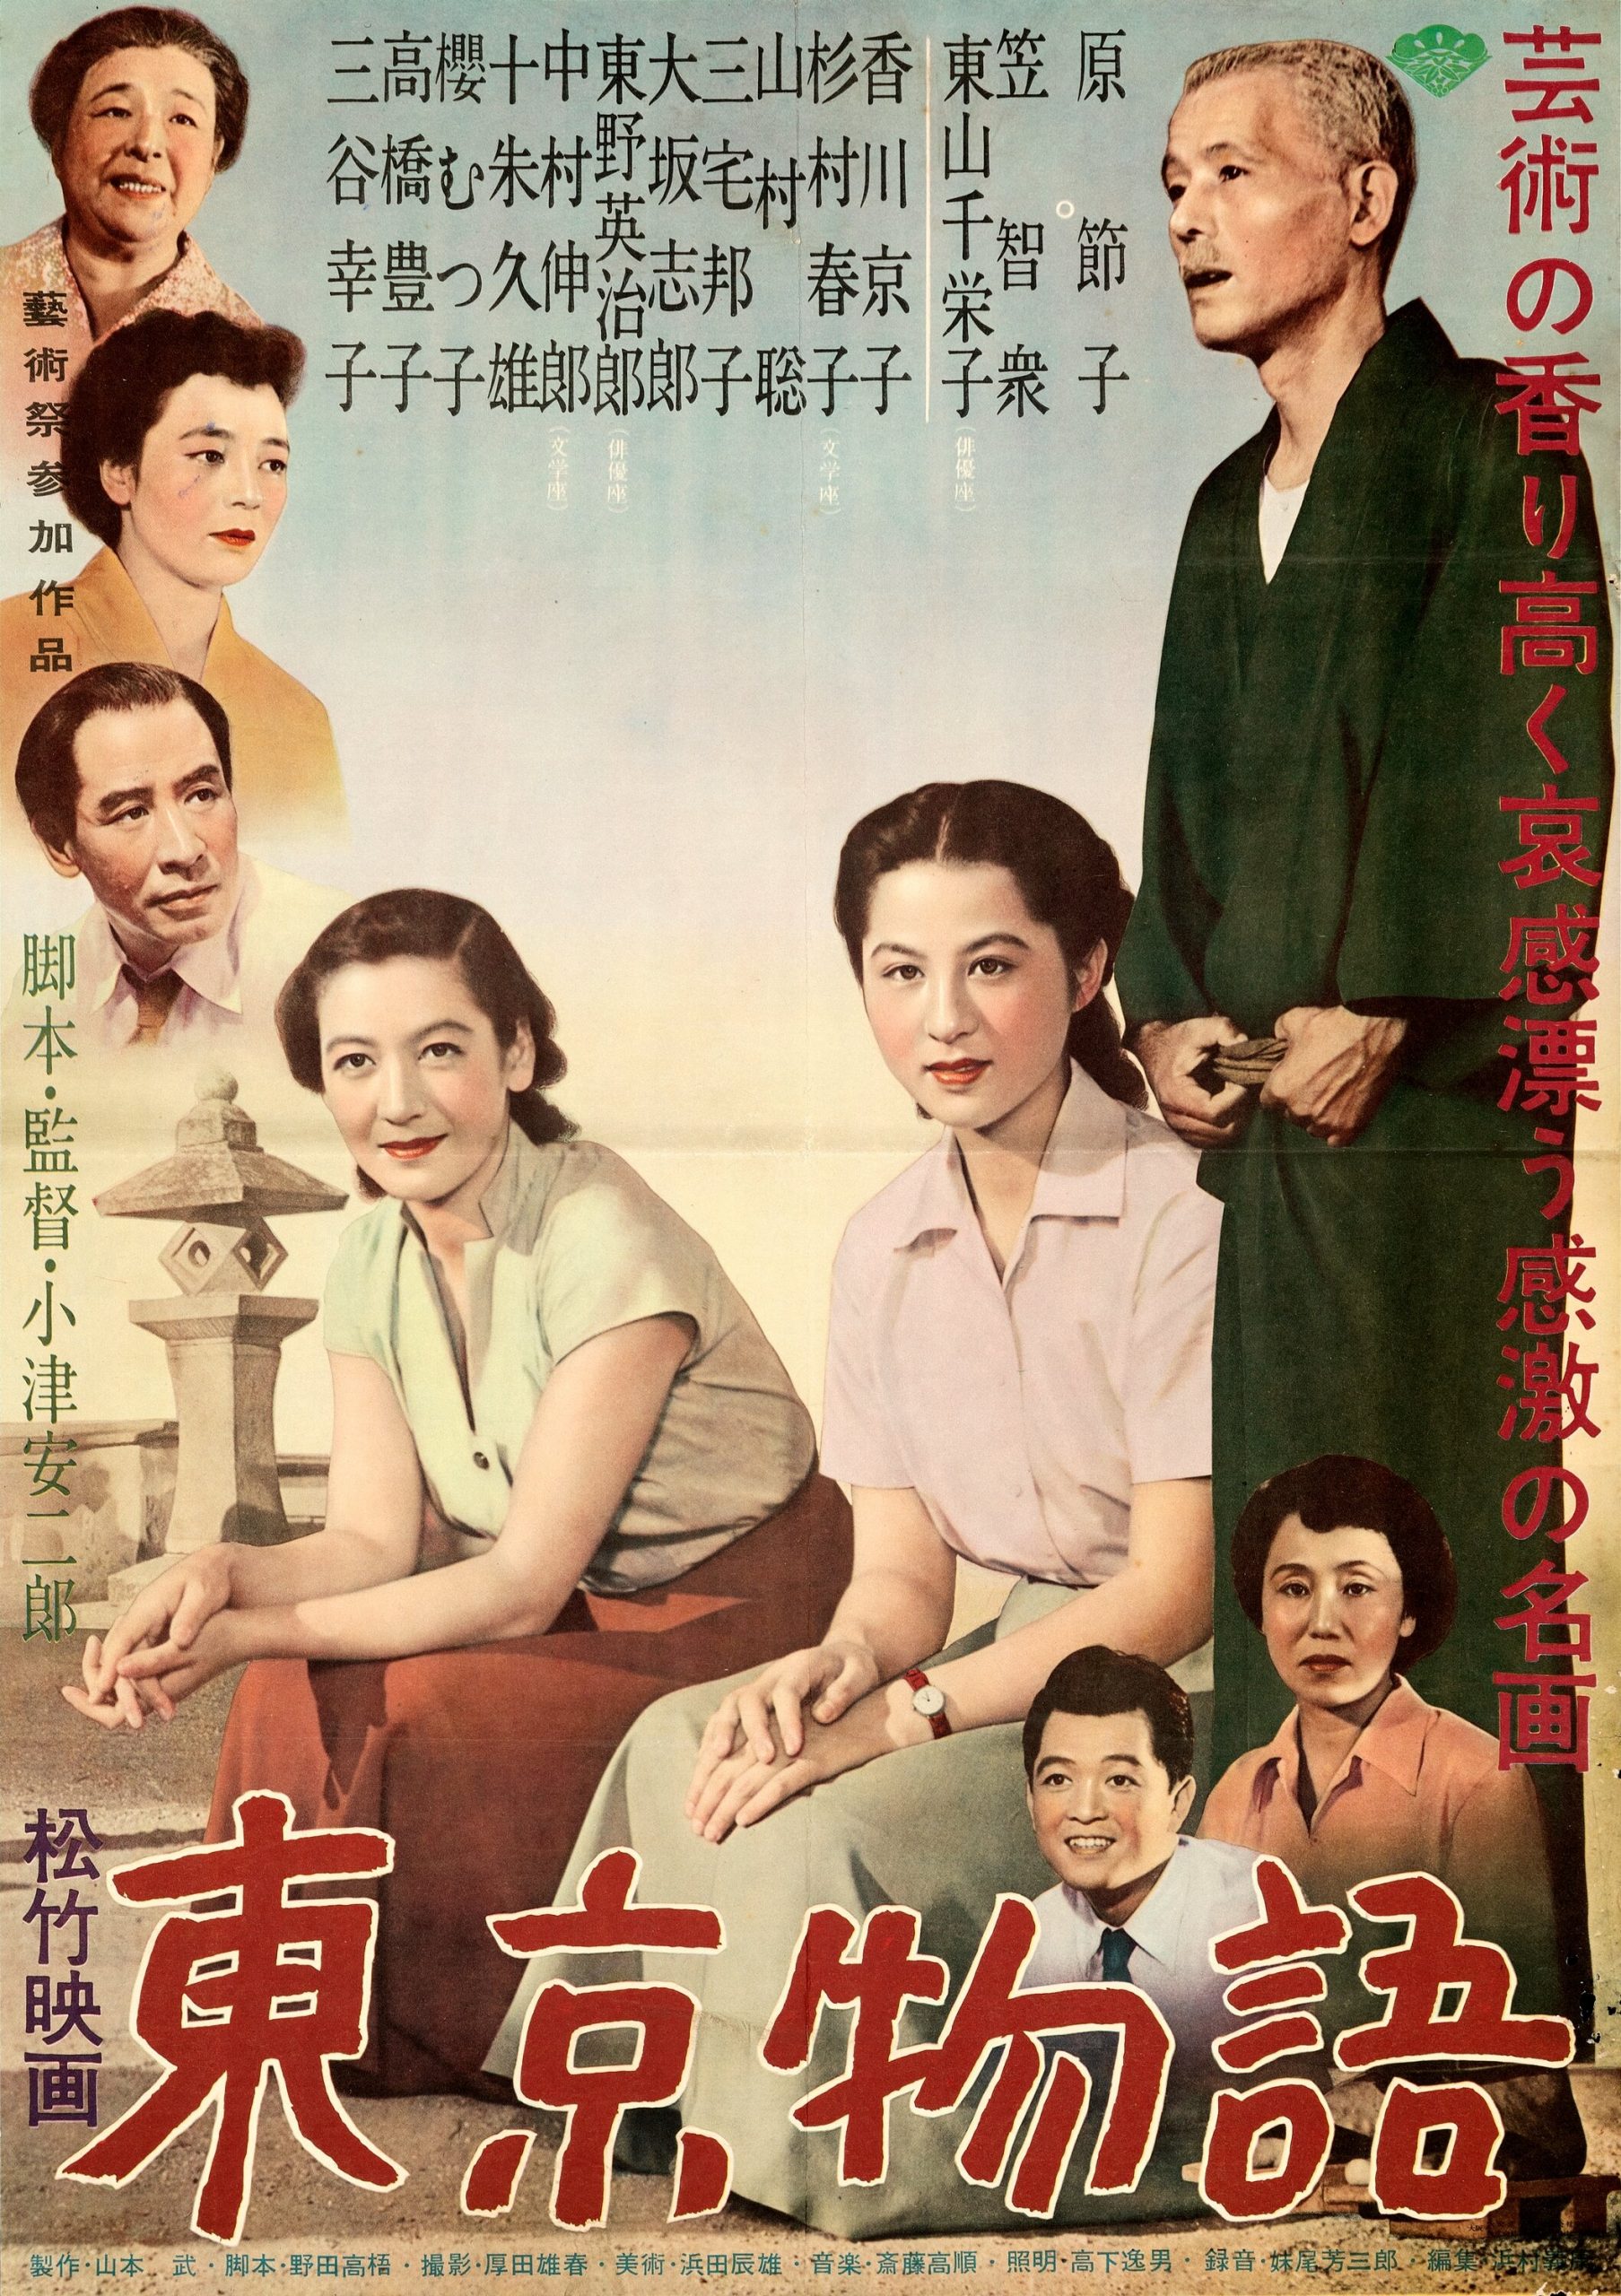 Tokyo story one of the greatest Japanese movies of all times